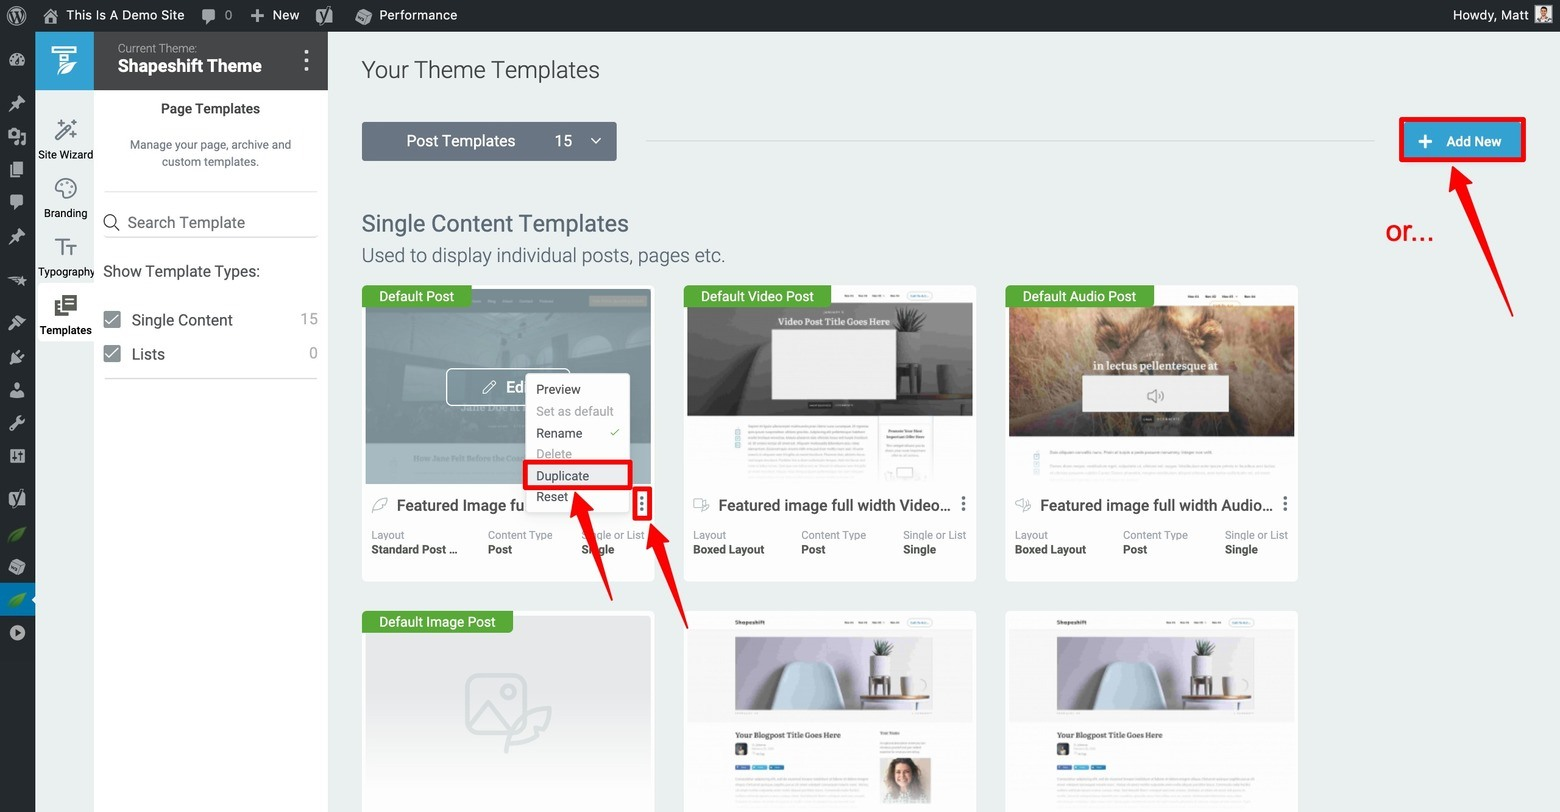 Duplicate or Create a new Custom Post Template inside the Thrive Theme Builder templates dashboard